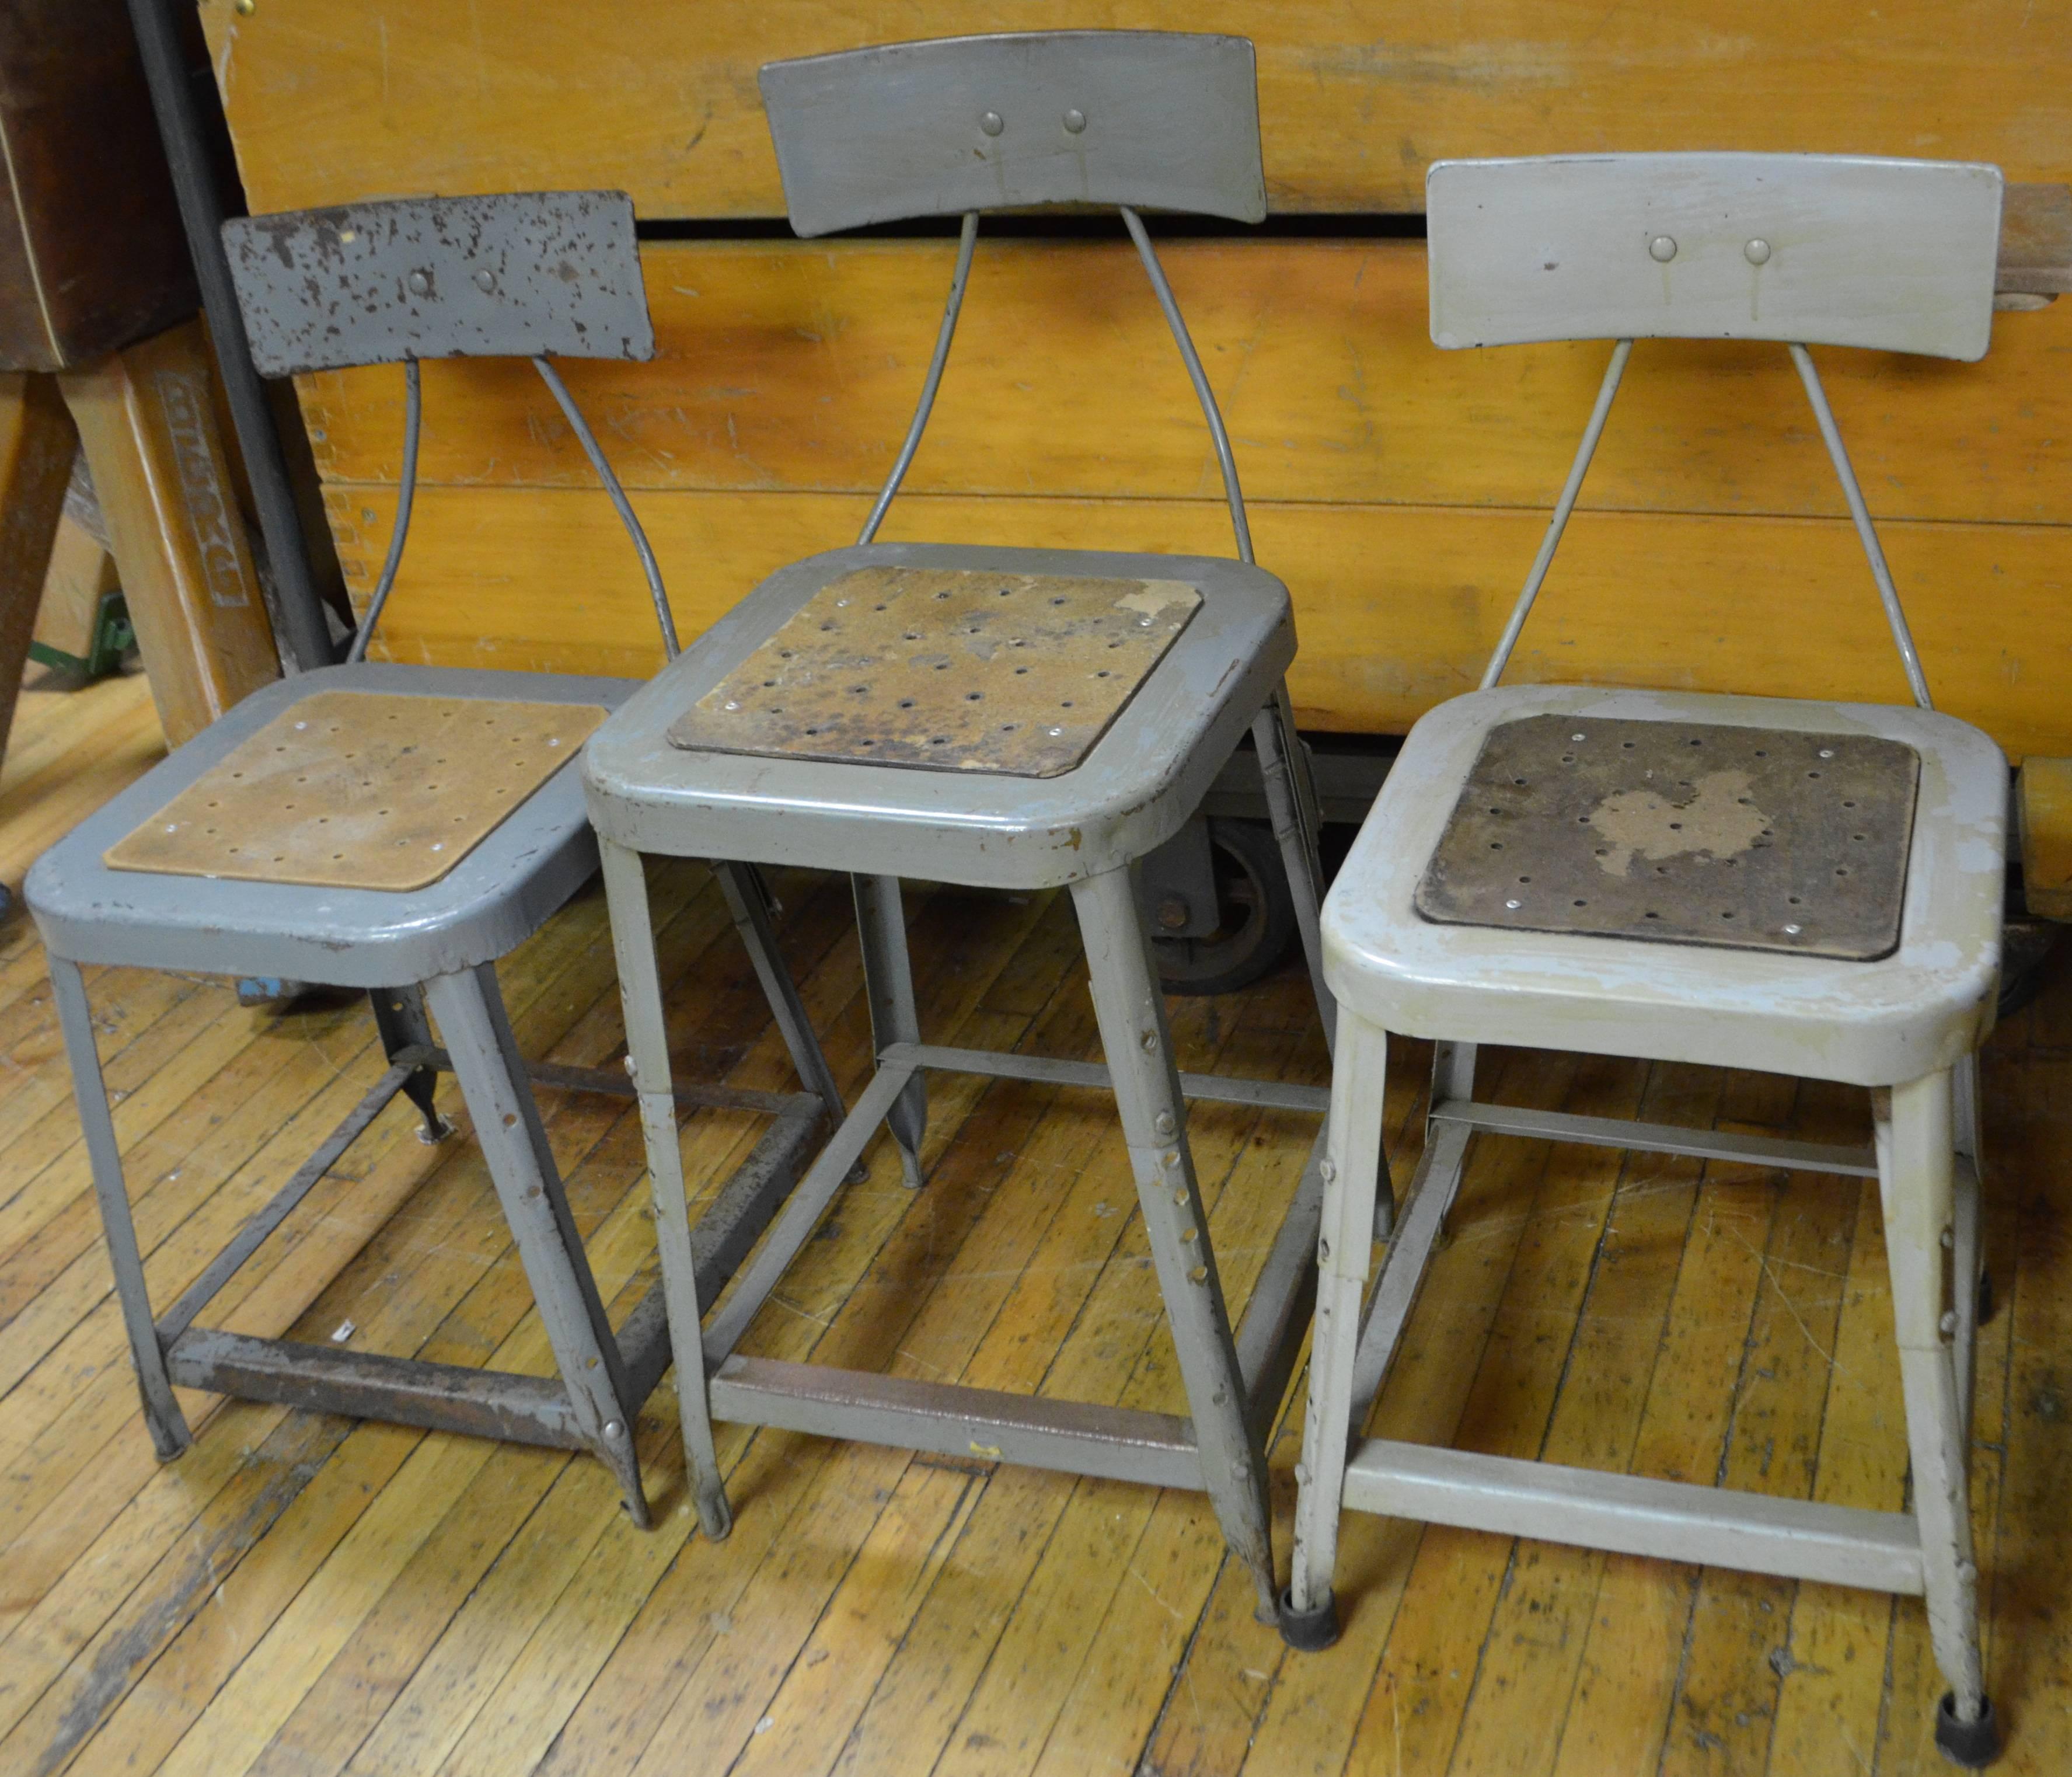 Factory steel chairs, set of three. Actually there are four Industrial chairs total but one didn't make the photo. We will include that 4th stool without charge. In other words, free when you purchase the set of three. Their height can be adjusted